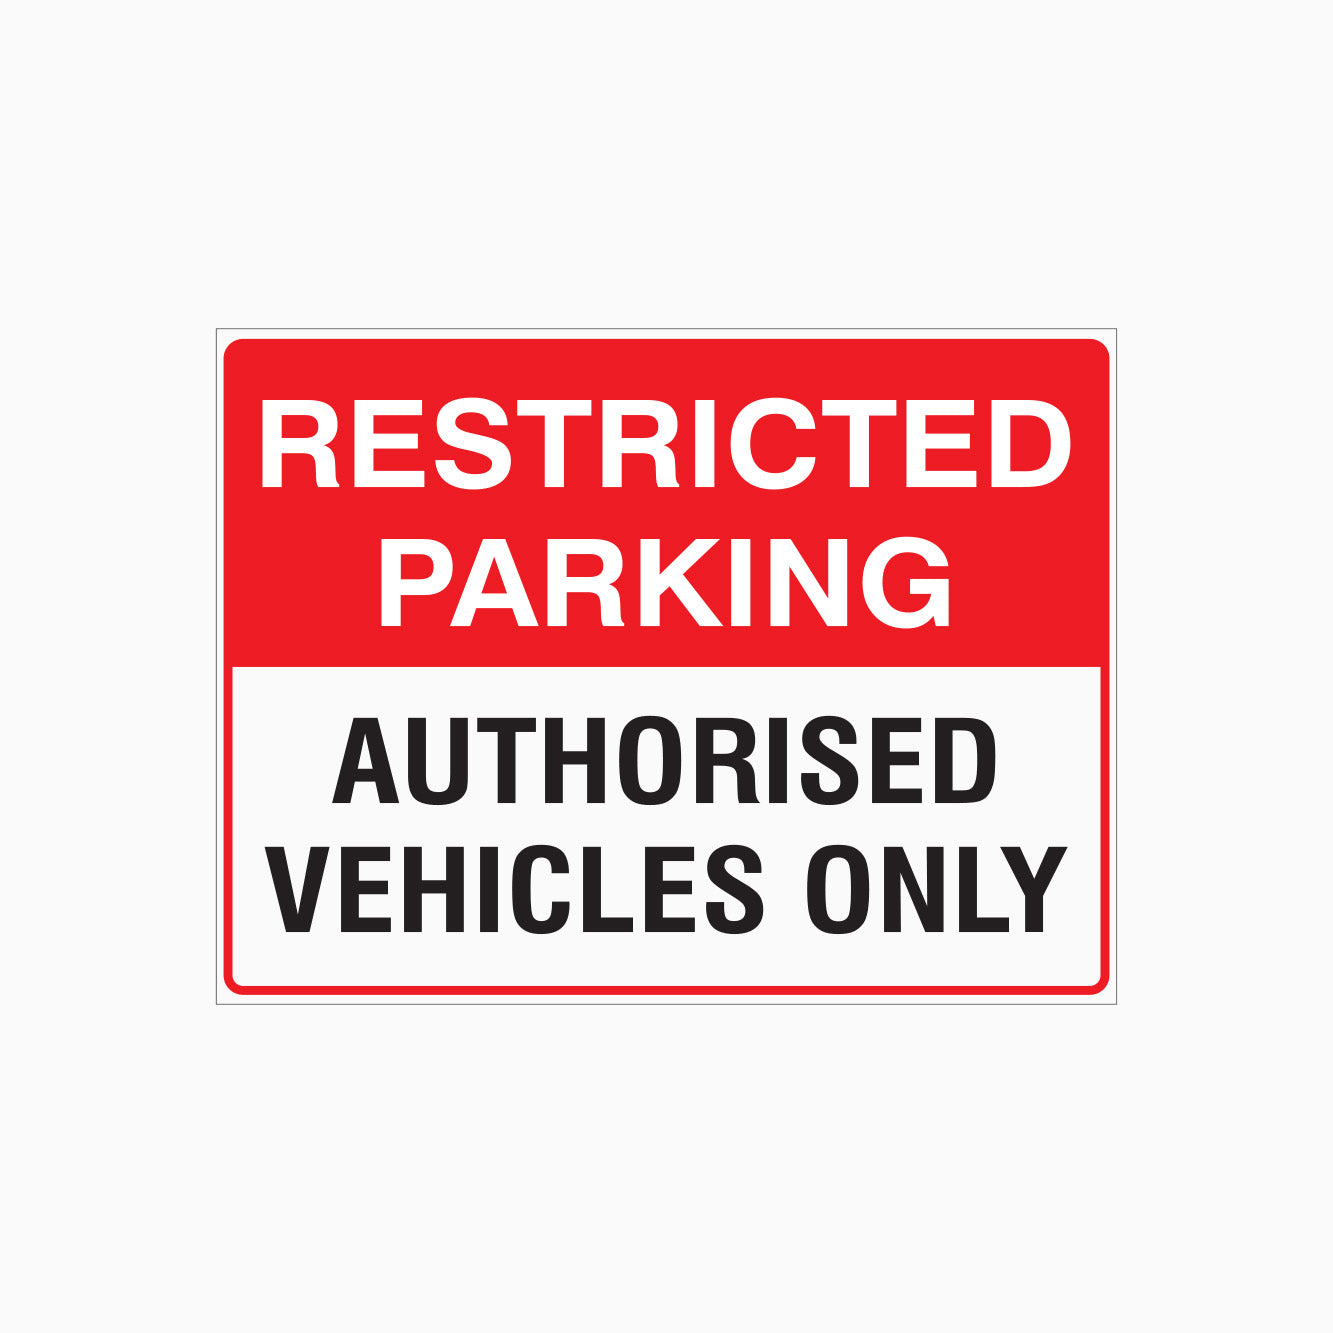 RESTRICTED PARKING SIGN - AUTHORISED VEHICLES ONLY SIGN 